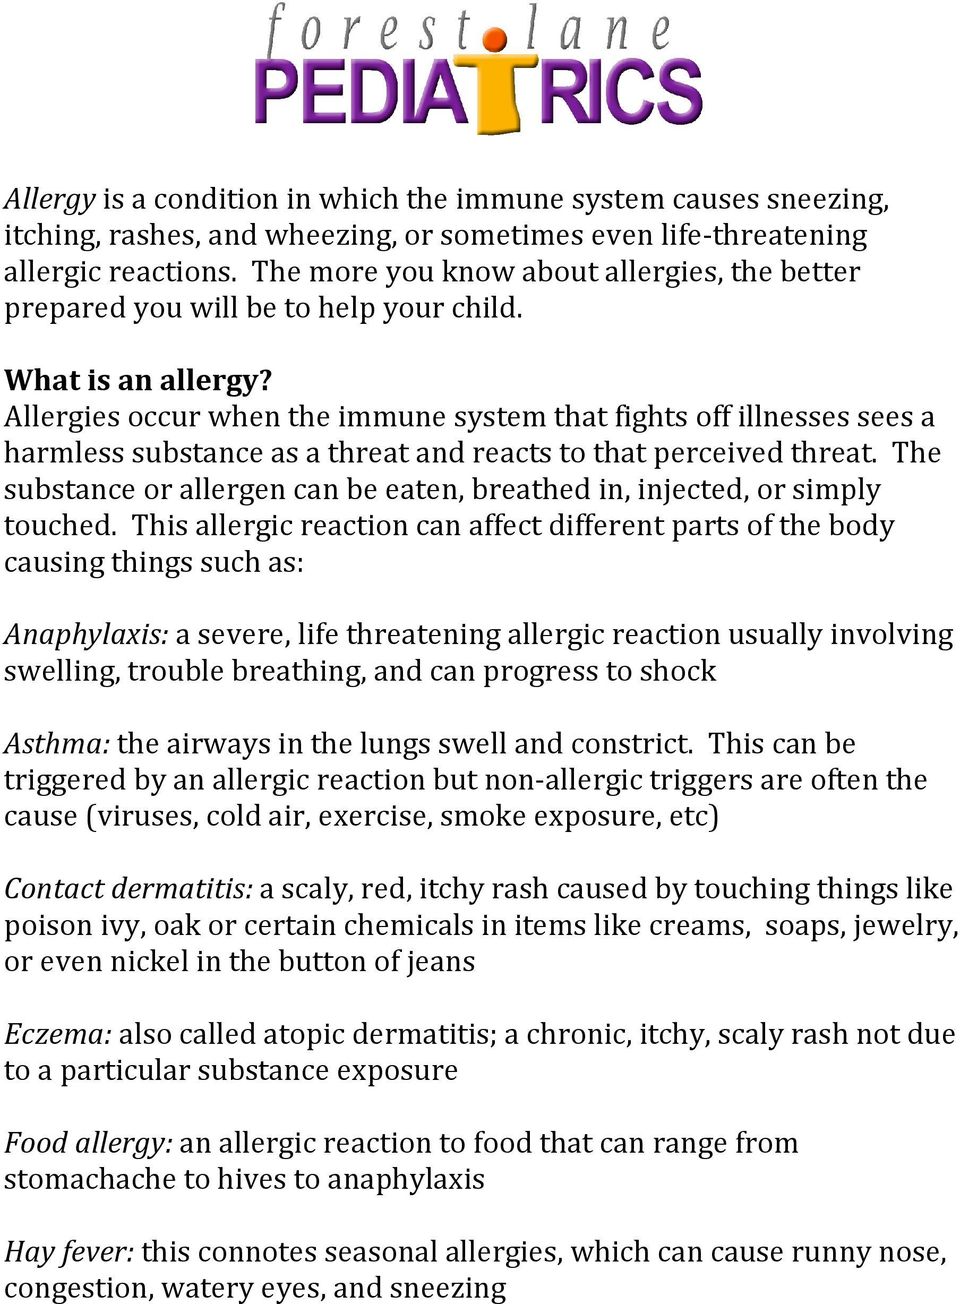 Allergies occur when the immune system that fights off illnesses sees a harmless substance as a threat and reacts to that perceived threat.